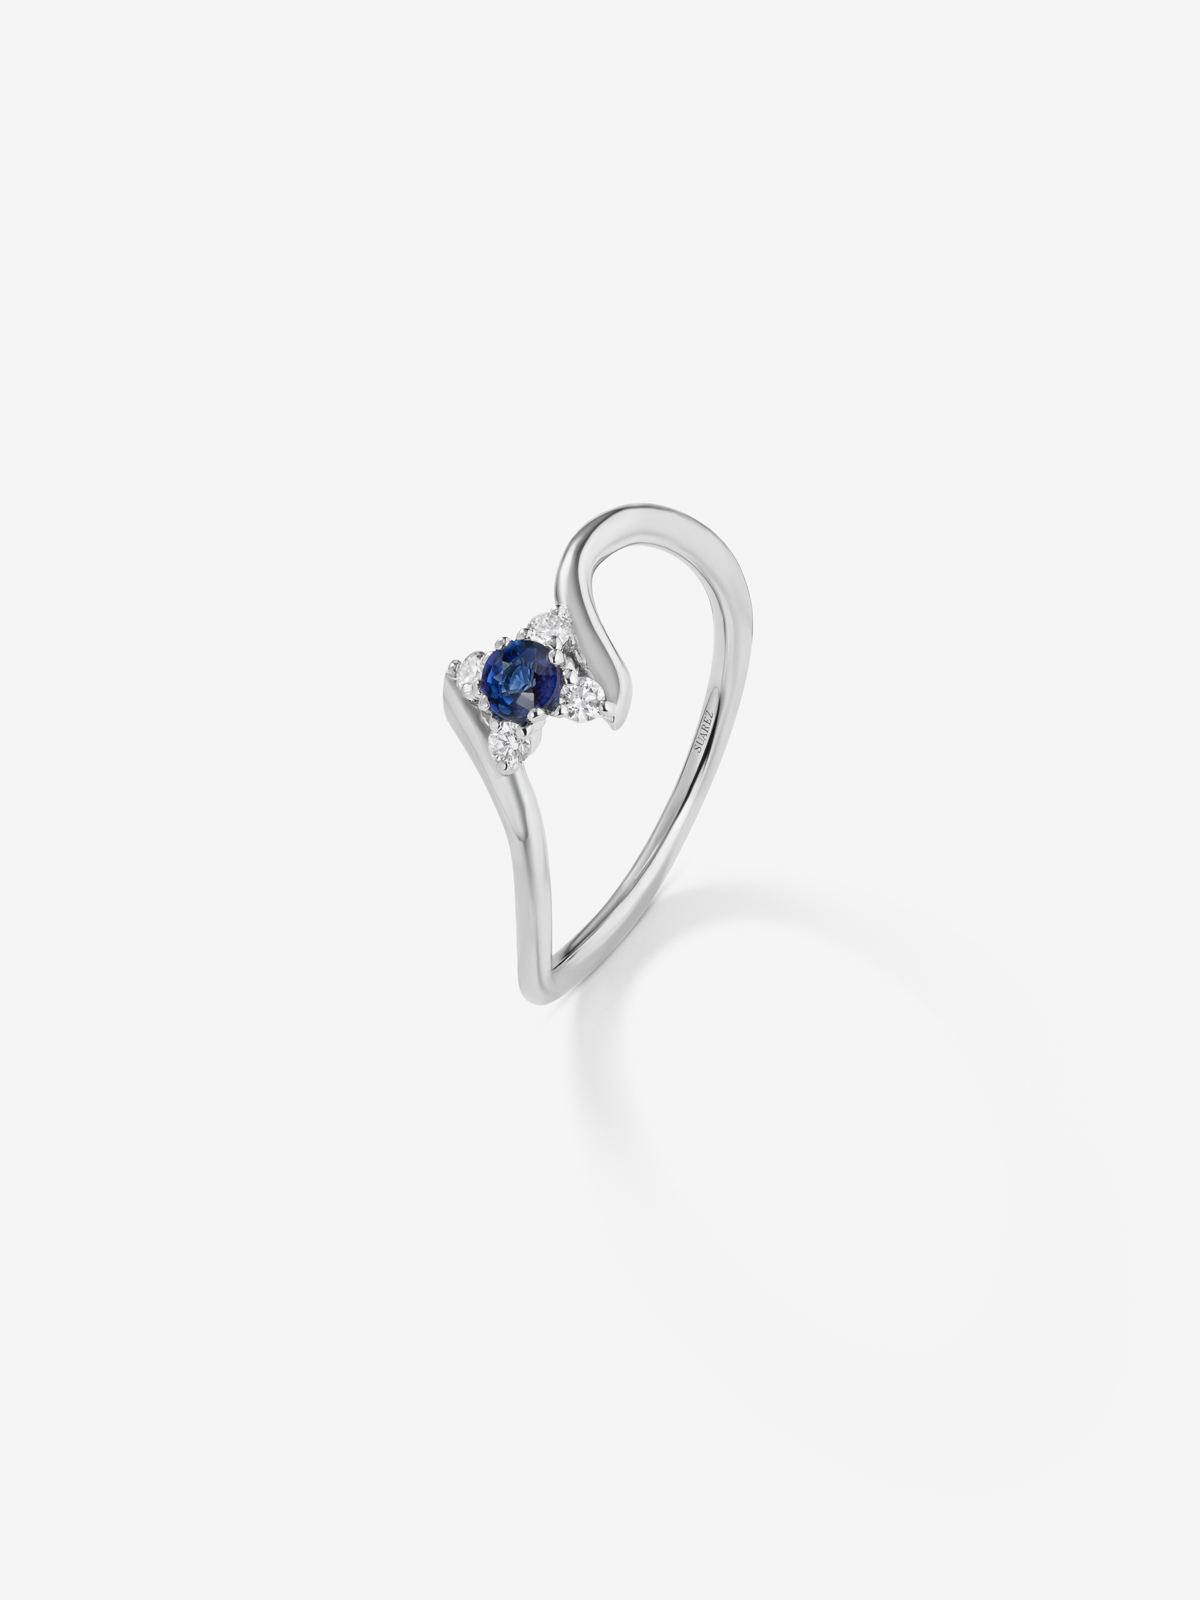 18K white gold ring with sapphire and diamonds.